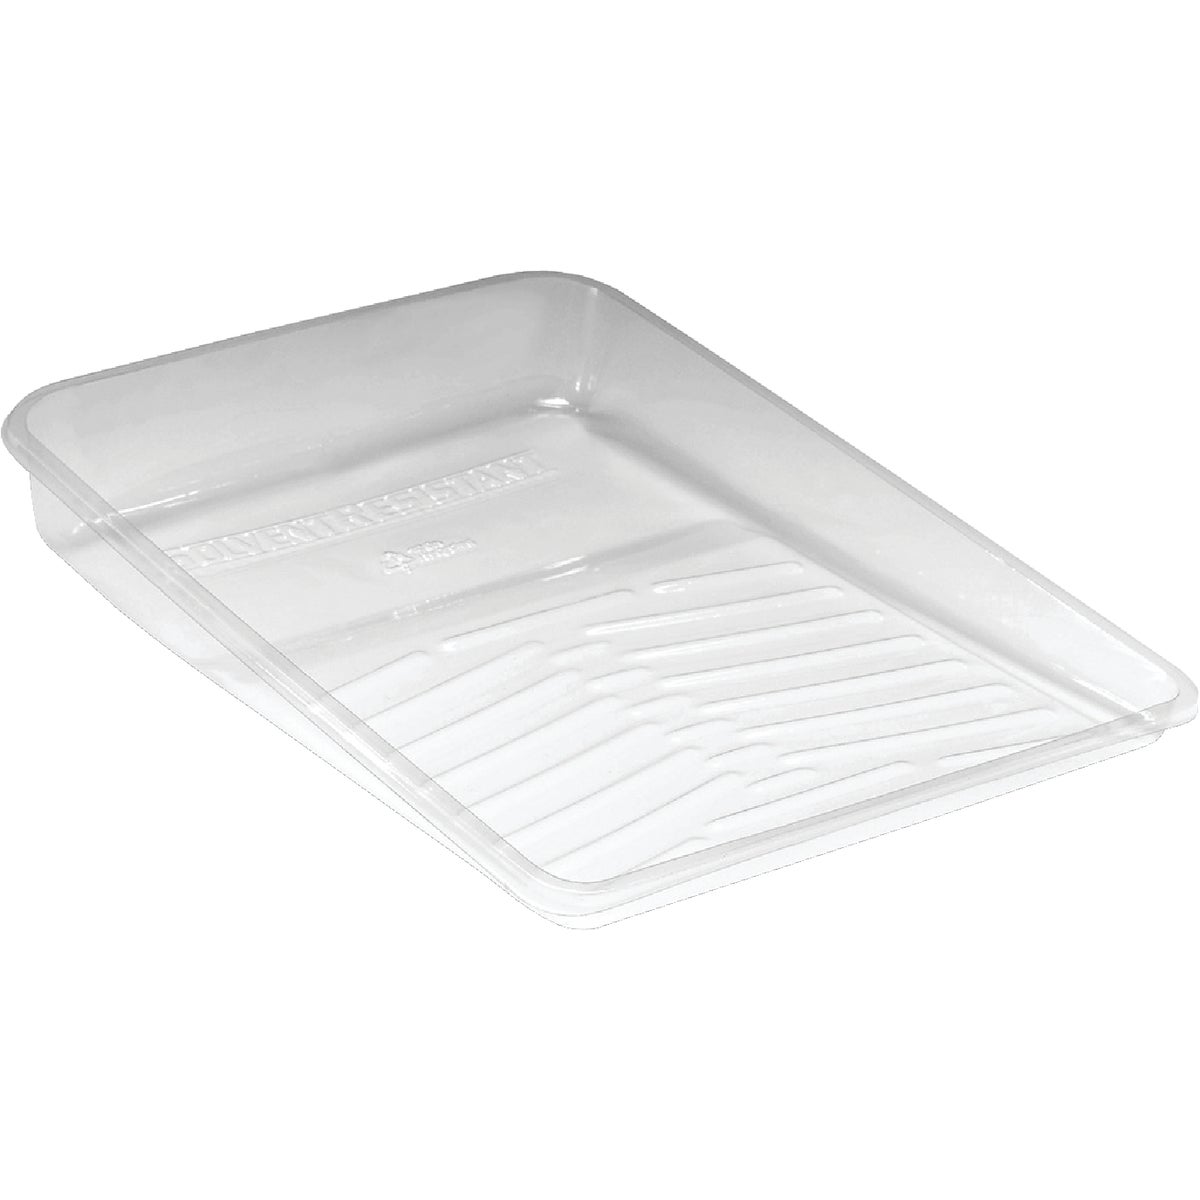 11″ DLX PAINT TRAY LINER